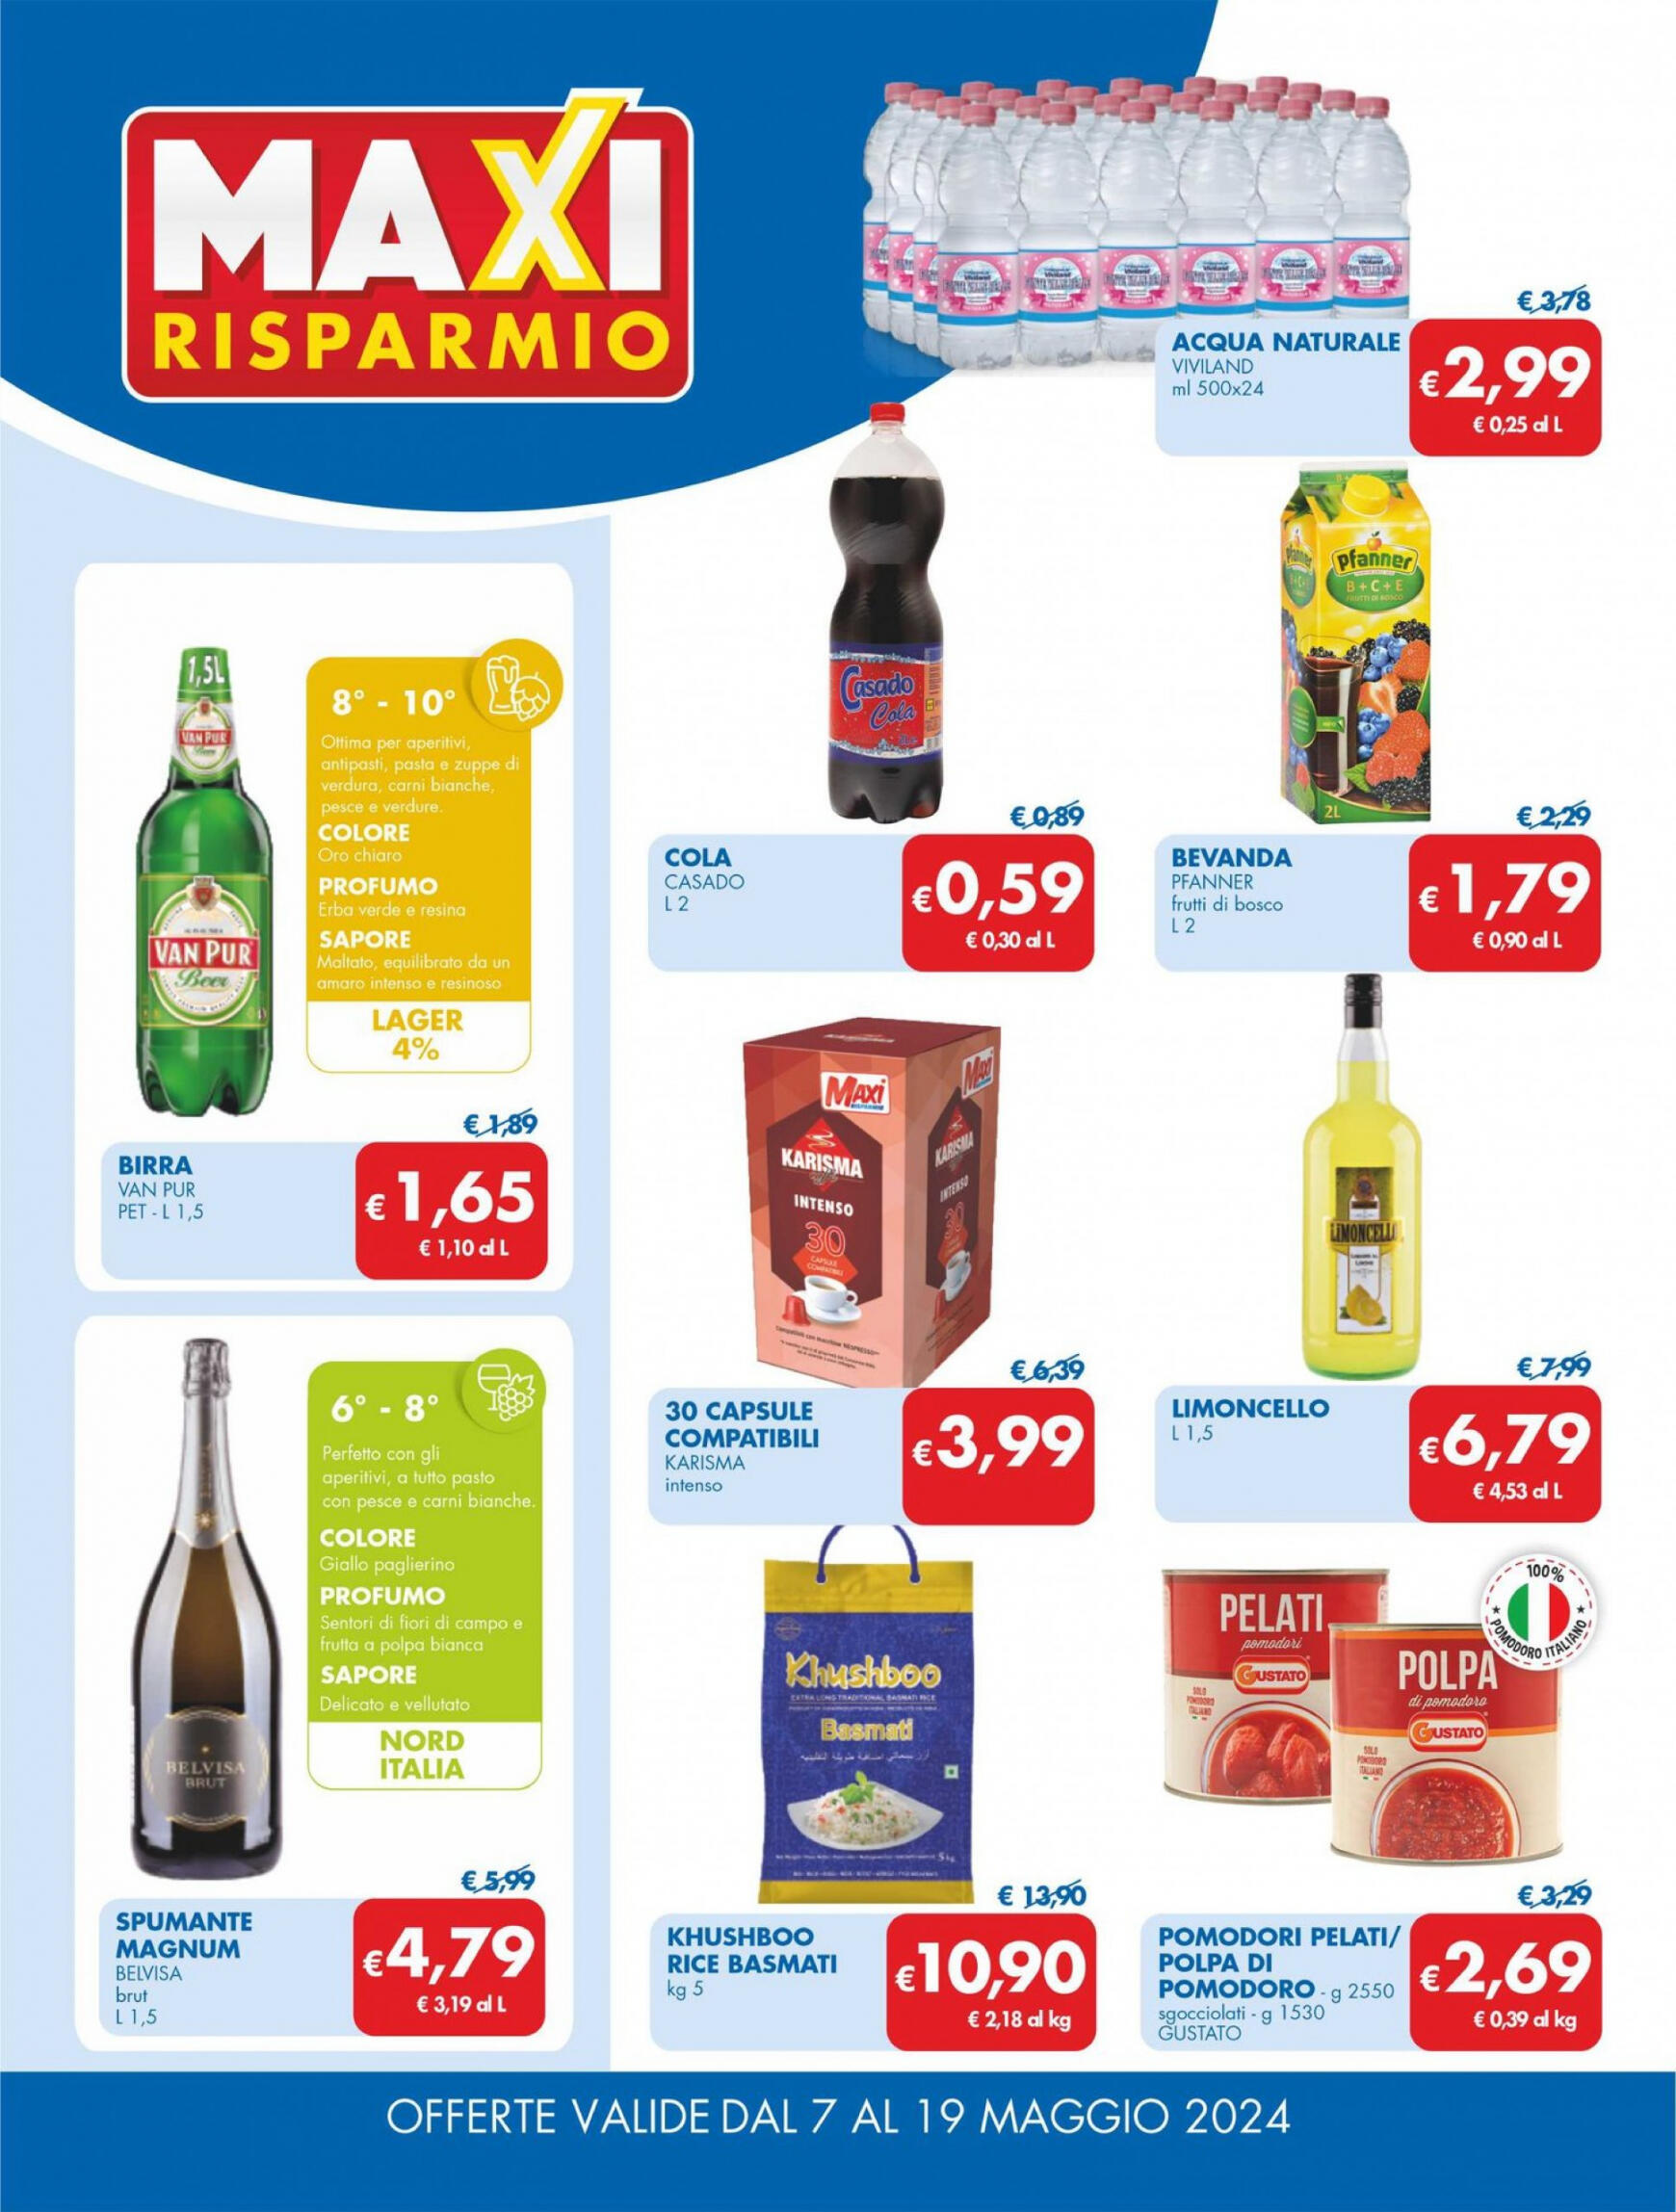 md-discount - Nuovo volantino MD - MD Discount 07.05. - 19.05. - page: 4